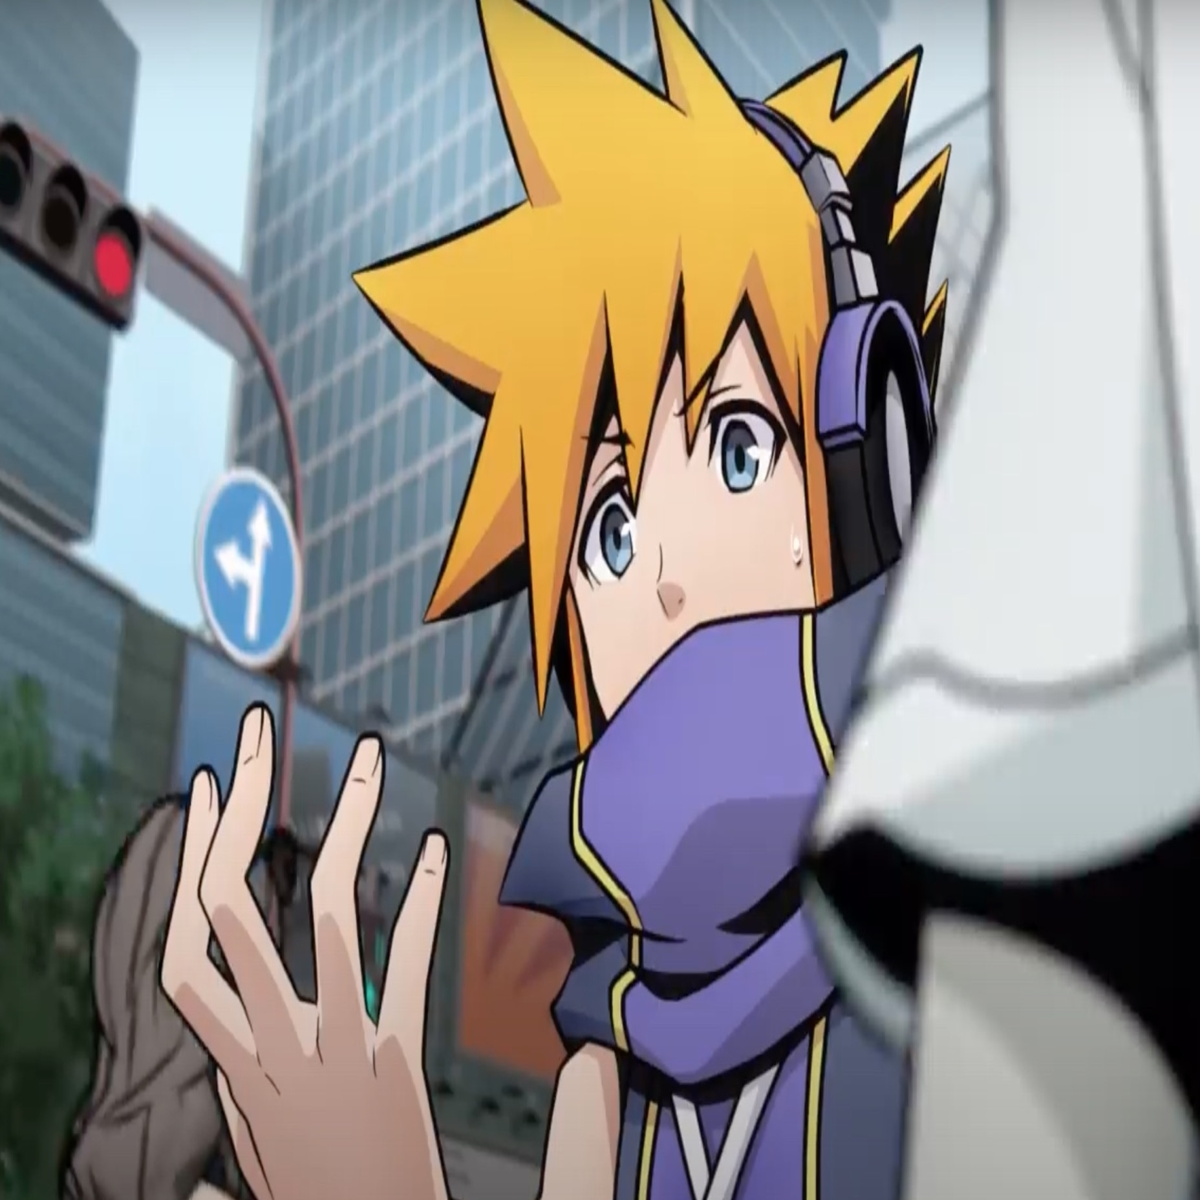 The World Ends With You' Anime Has A New Trailer